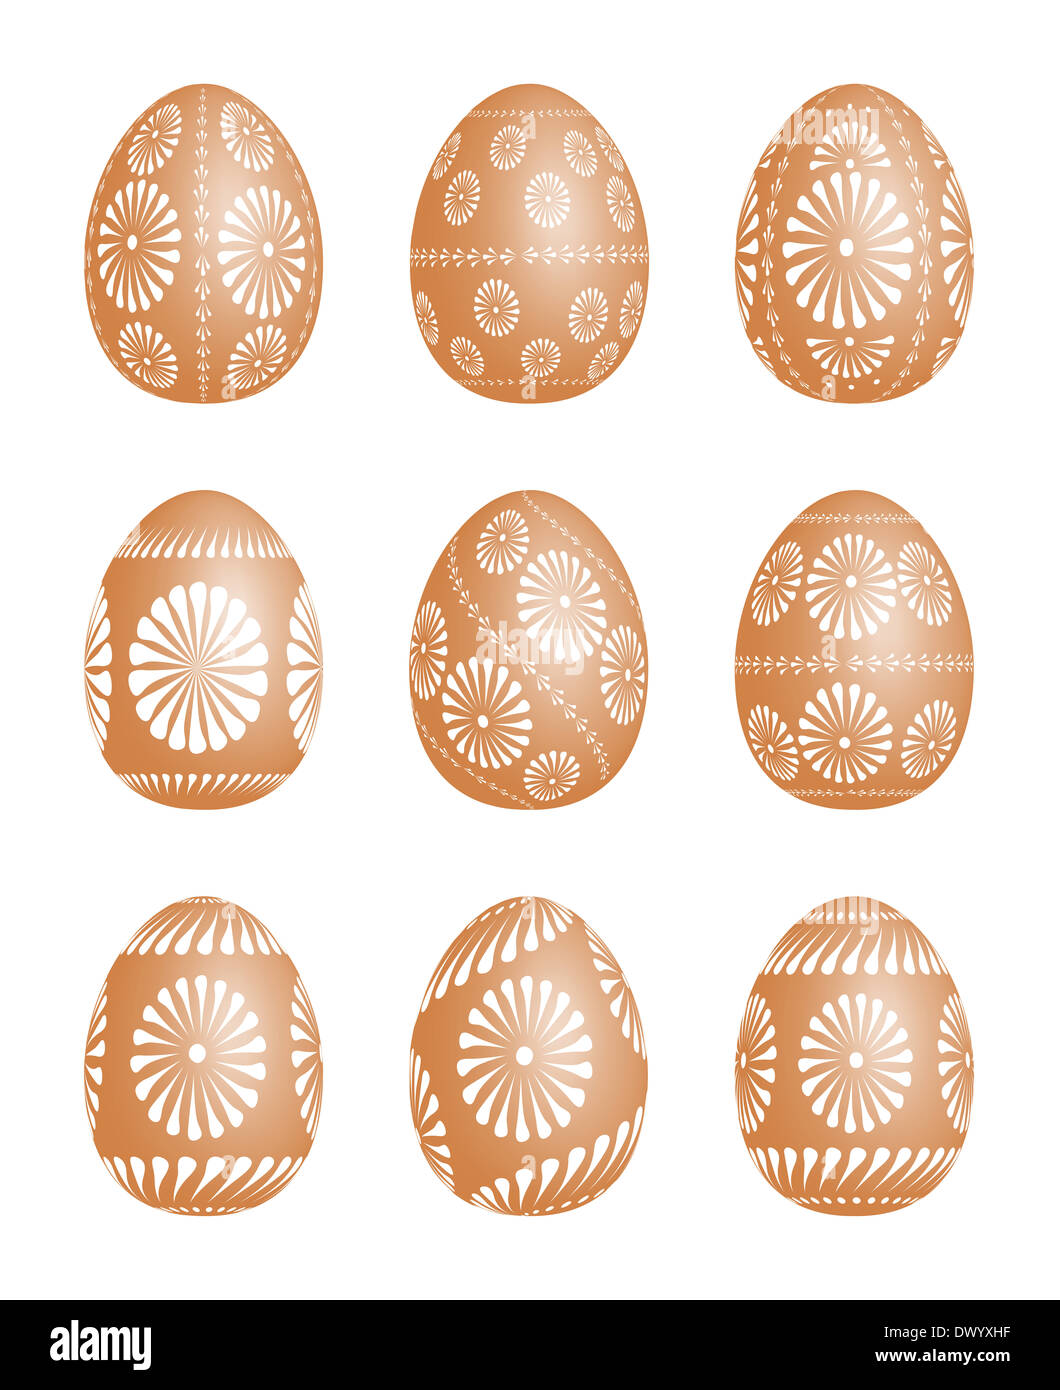 Pysanky - traditional eastern Europe decorated with wax Easter Eggs. Illustration over white background. Stock Photo